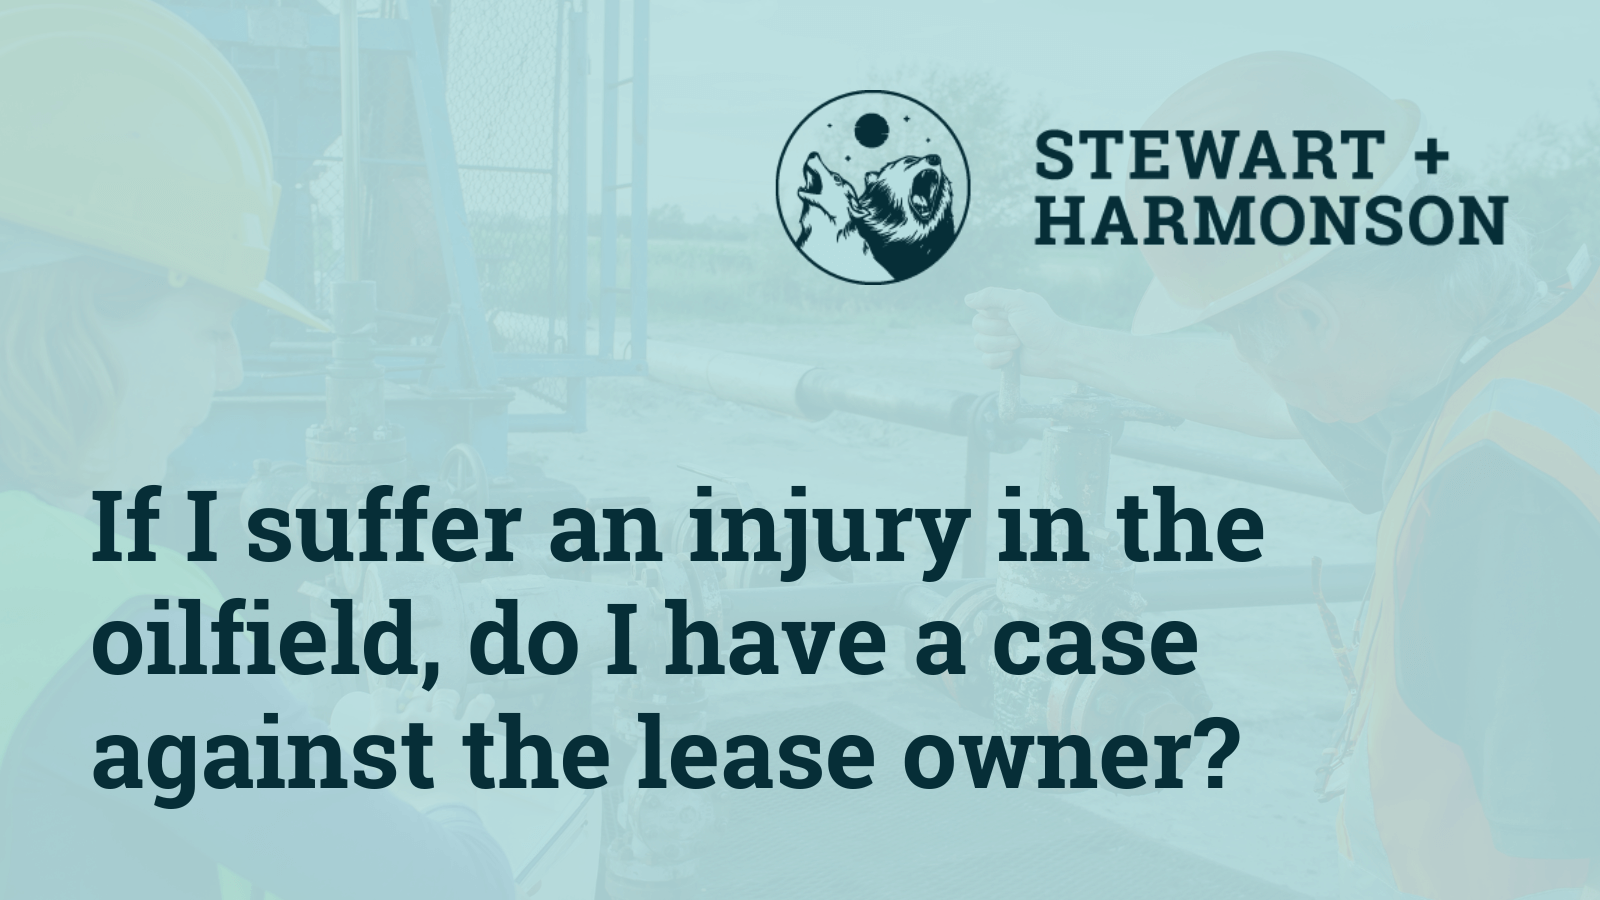 If I suffer an injury in the oilfield do I have a case against the lease owner - Stewart Harmonson Law Firm - New Mexico